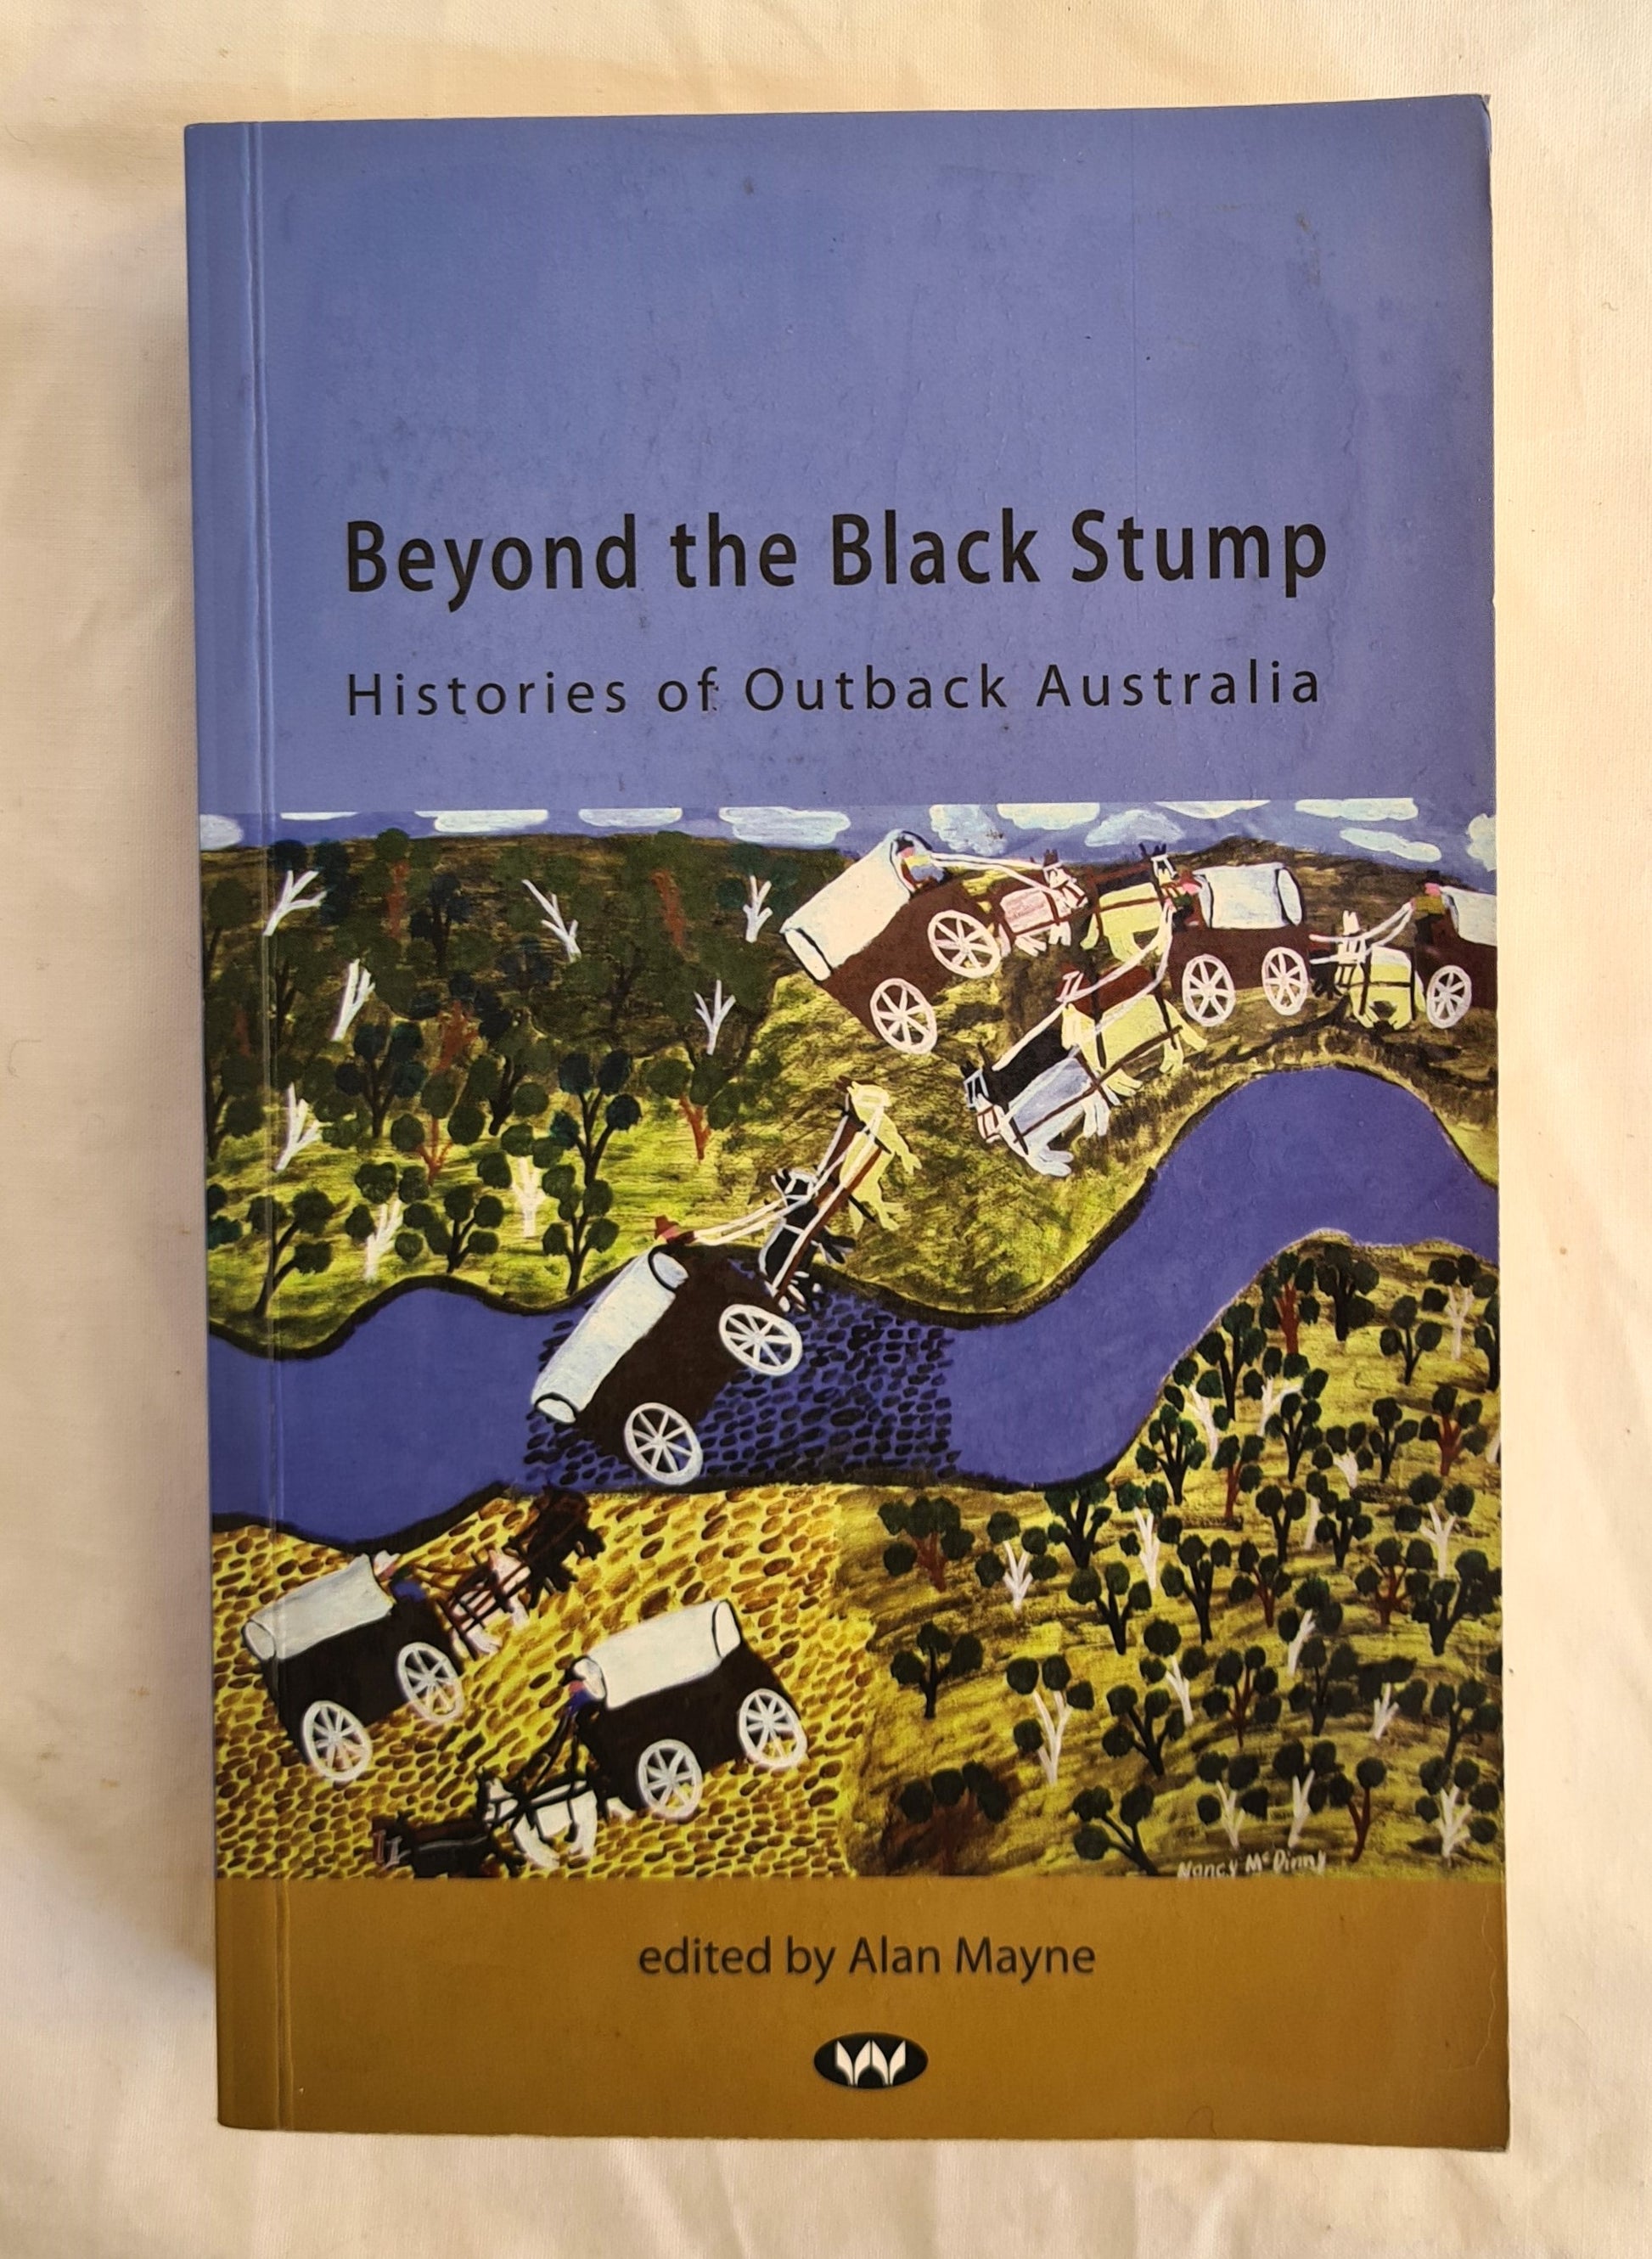 Beyond the Black Stump  Histories of Outback Australia  Edited by Alan Mayne